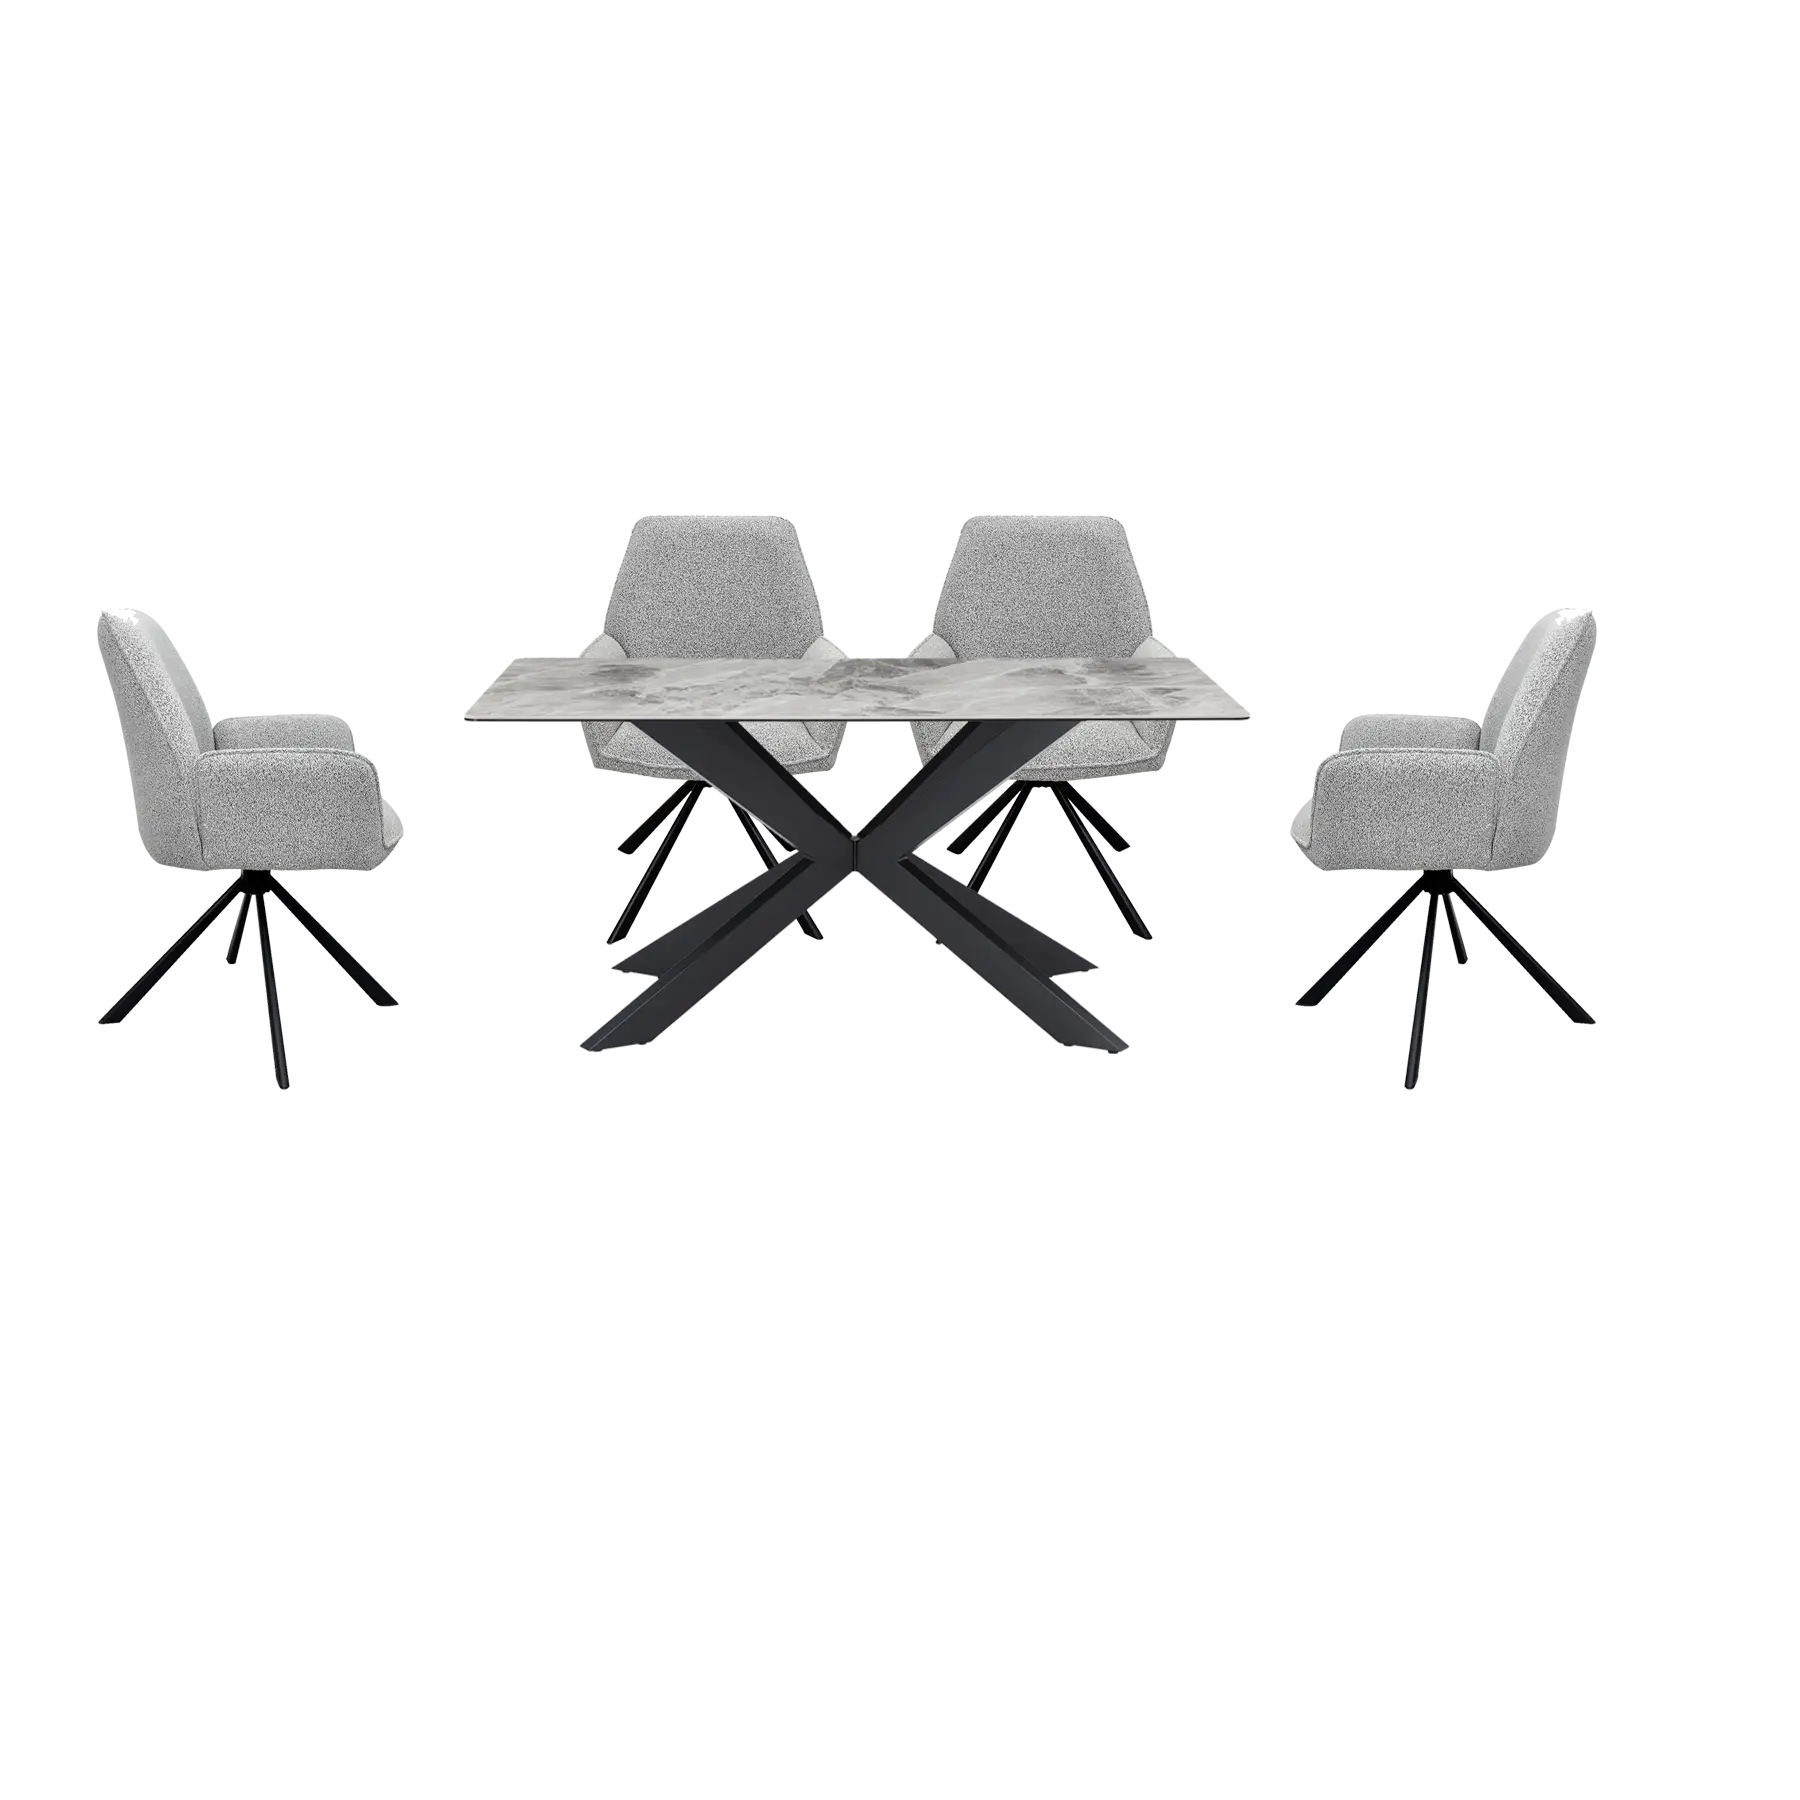 Creed 135cm Light Grey Ceramic Table with Grey Boucle Chairs Dining Set